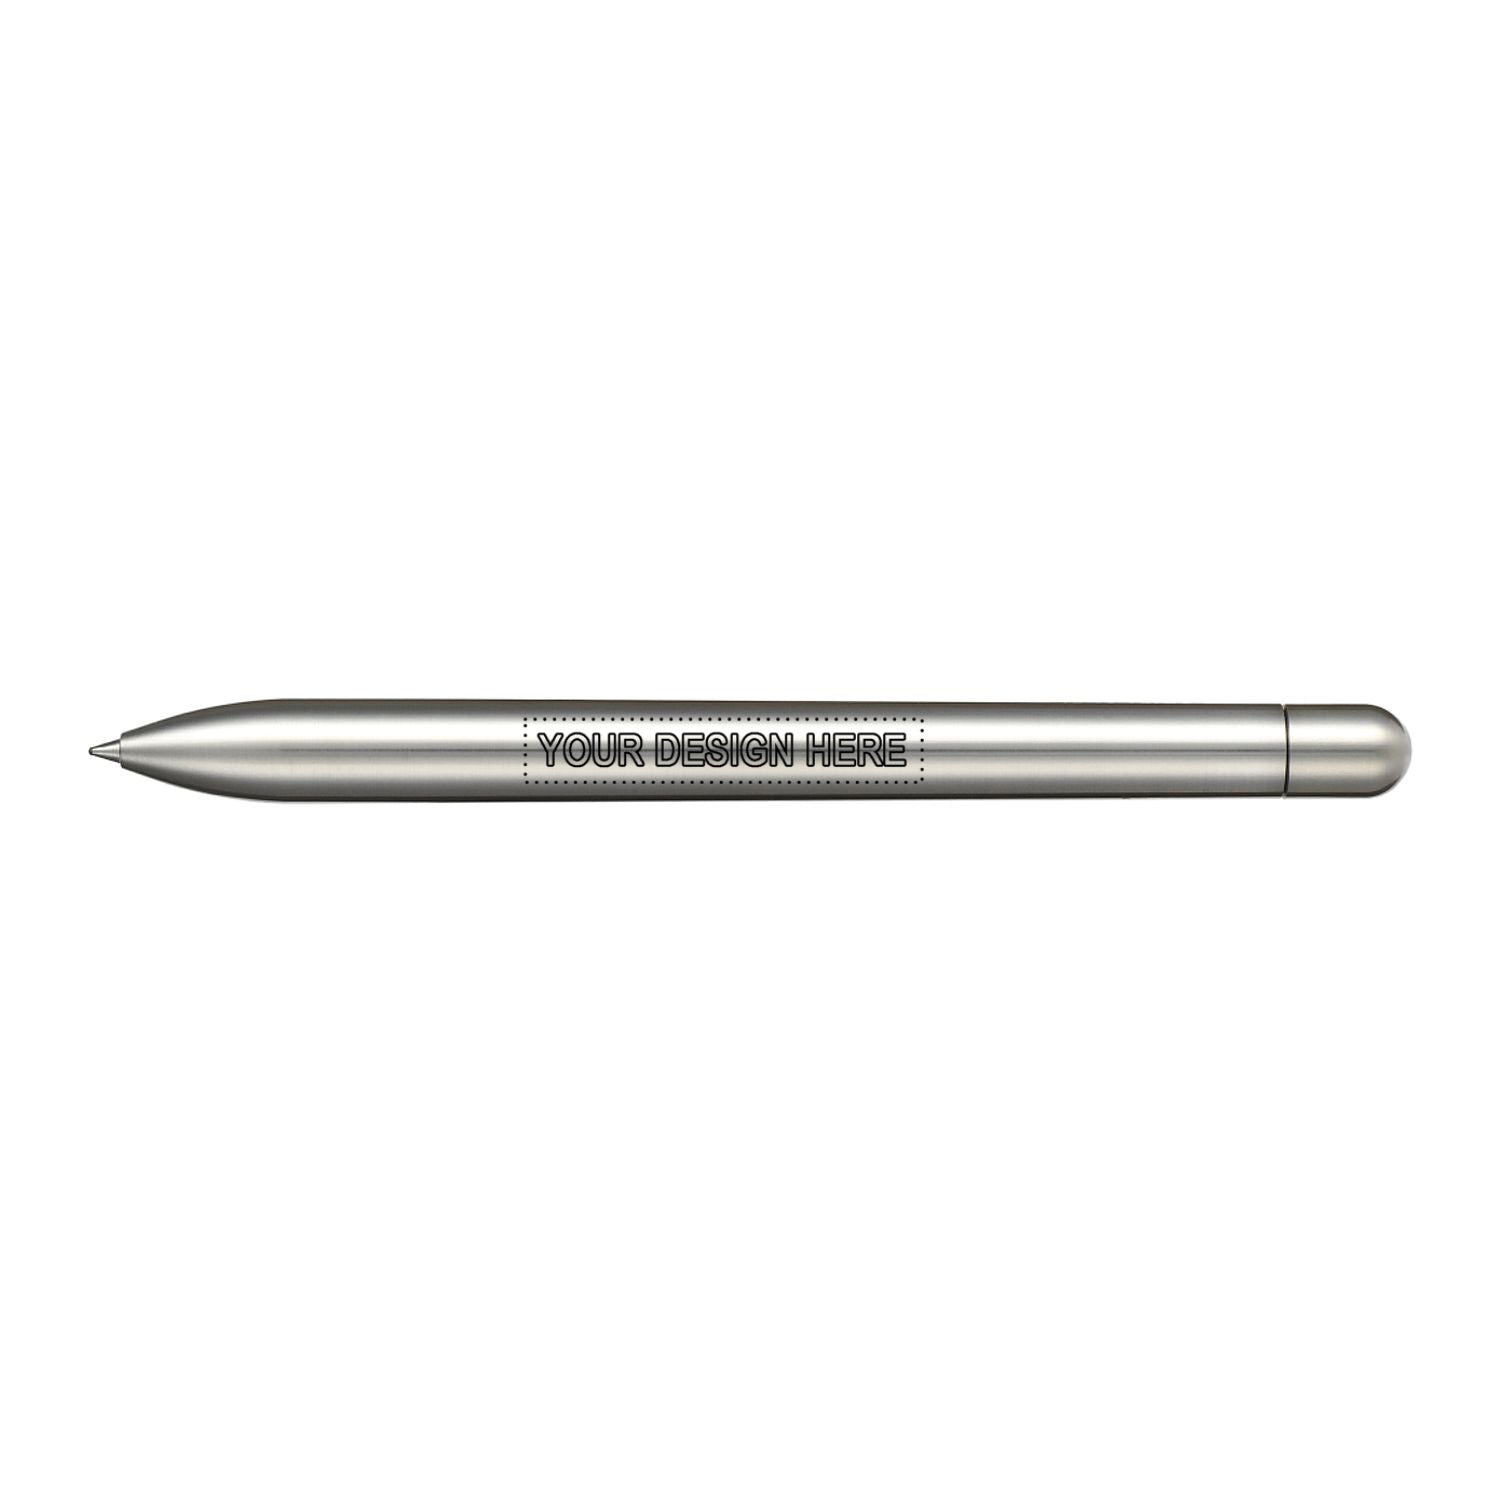 Customizable Baronfig Squire precious metals stainless steel pen.